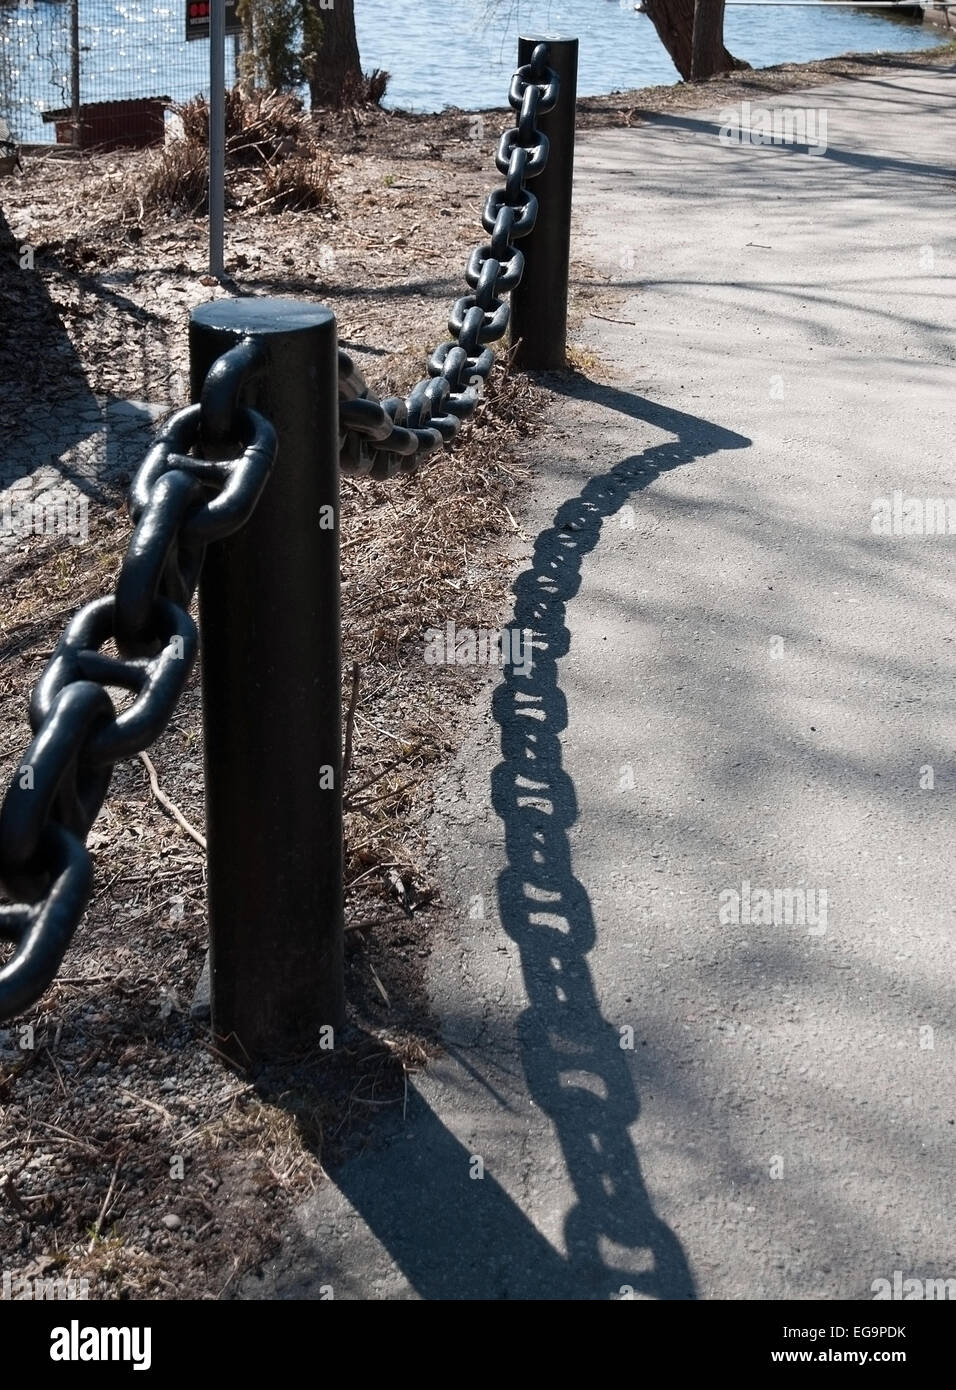 Black chain fence with interesting shadow pattern, Solna, Sweden. Stock Photo